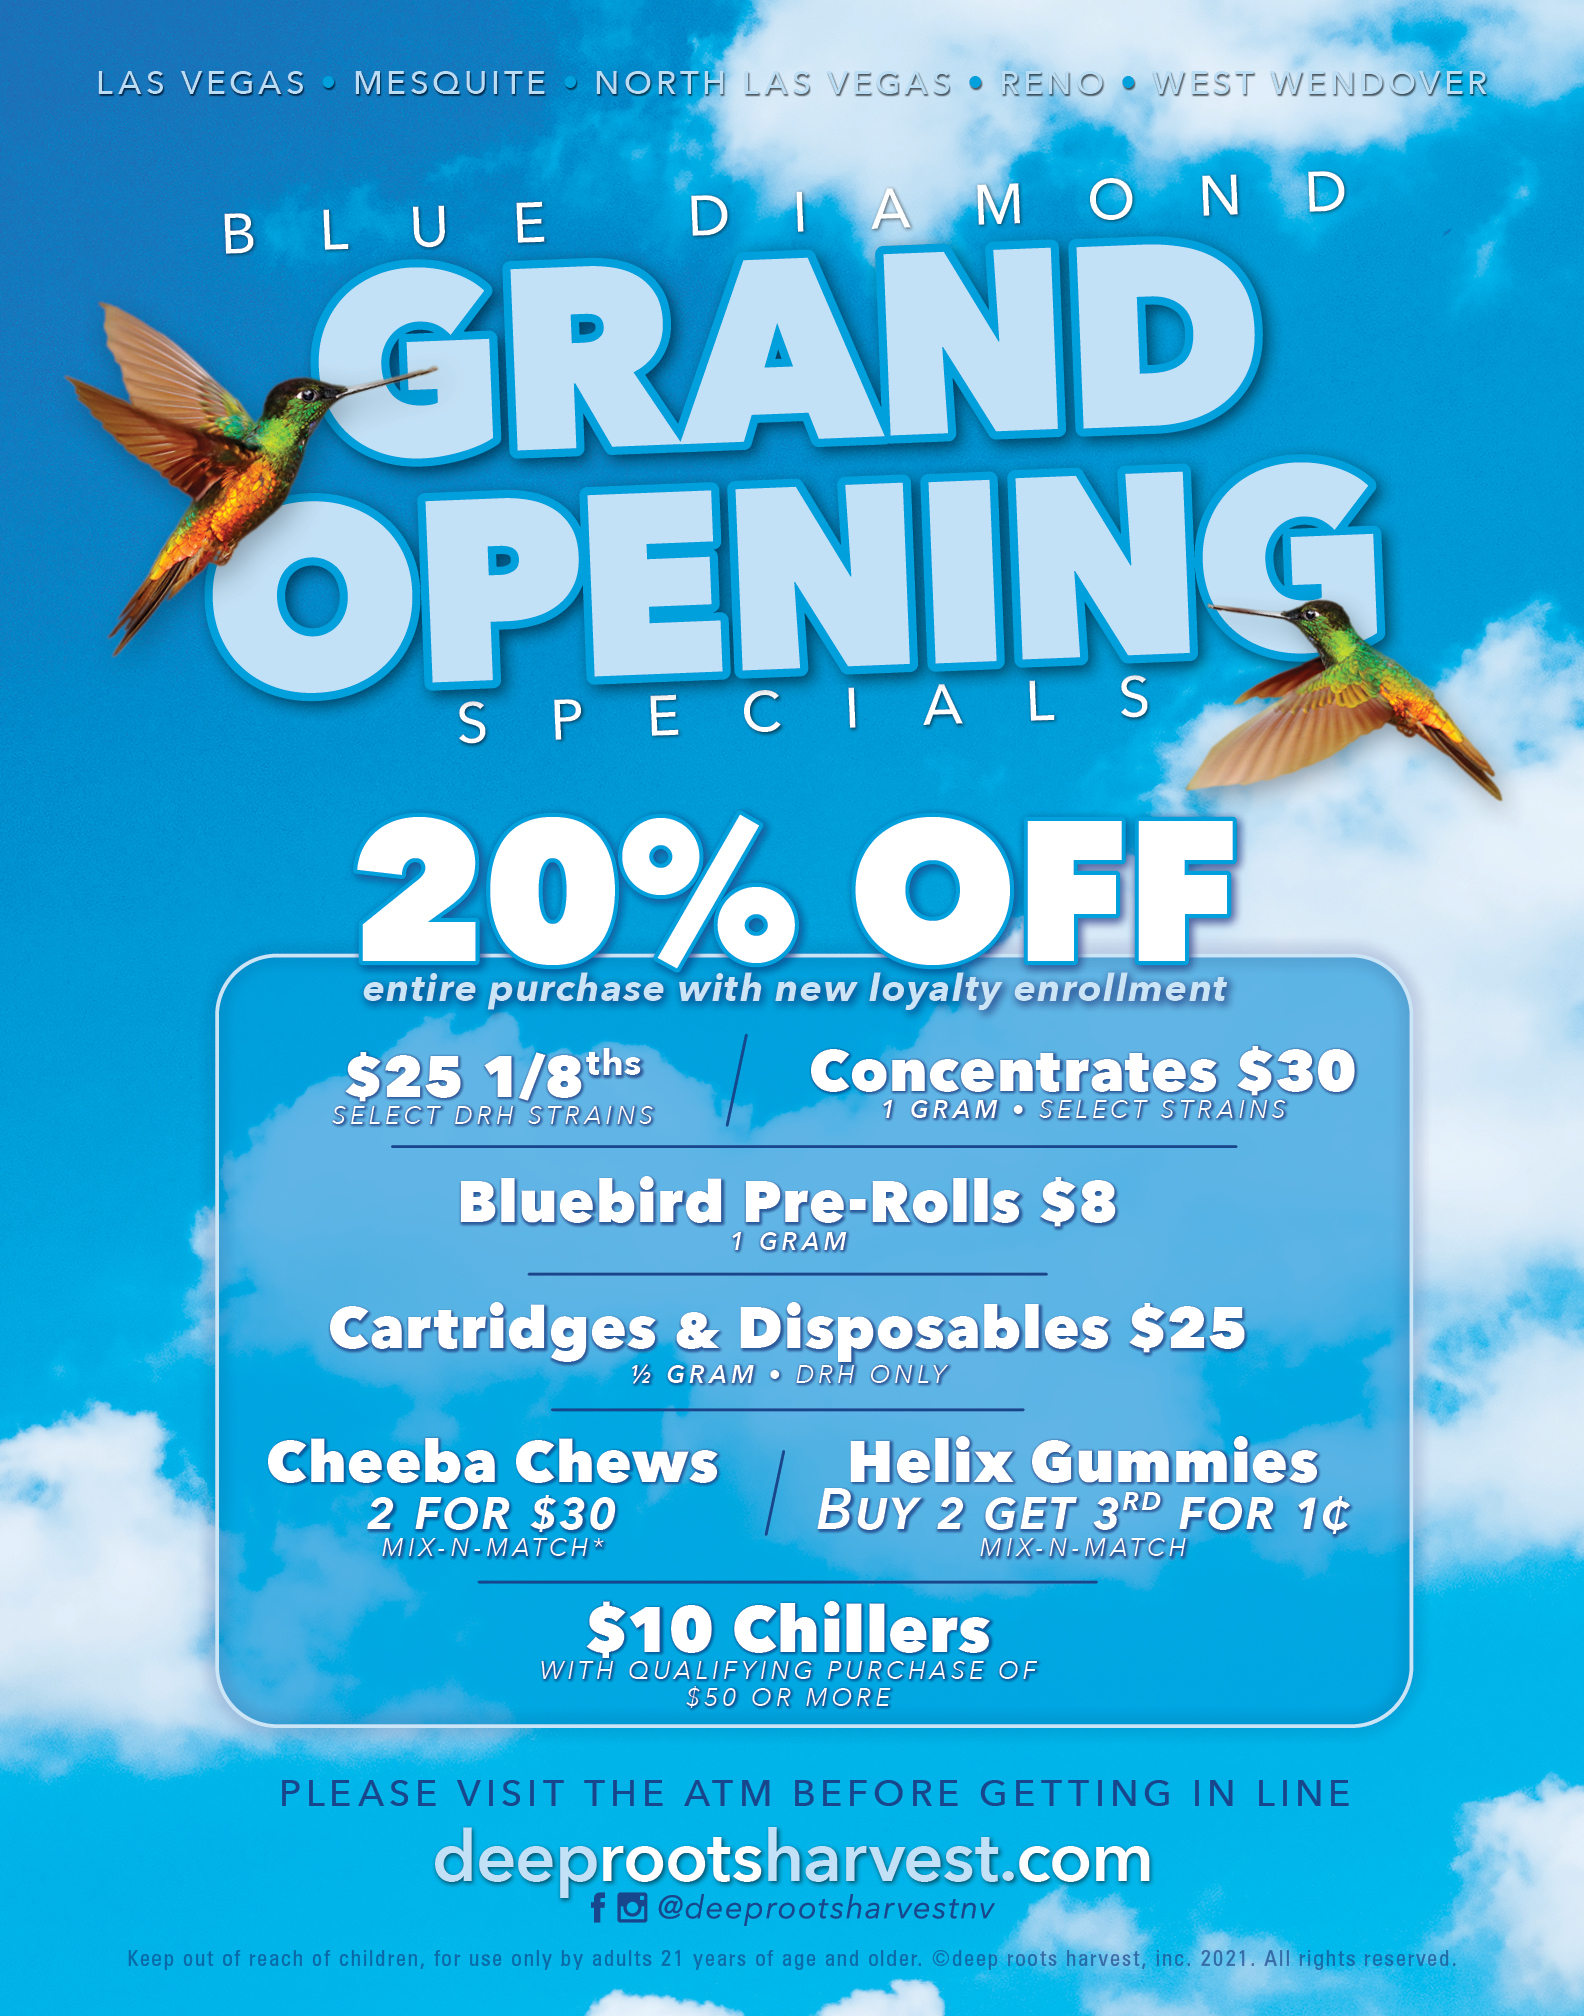 Blue Diamond Grand Opening Specials 20% off with loyalty enrollment. $25 1/8ths on select DRH strains. $30 1g concentrates select strains. $8 Bluebird 1g prerolls. $25 DRH cartridges and disposables. Cheeba Chews 2 for $30. Helix Gummies buy 2 get the 3rd for a penny. $10 Chillers with a purchase of $50 or more.